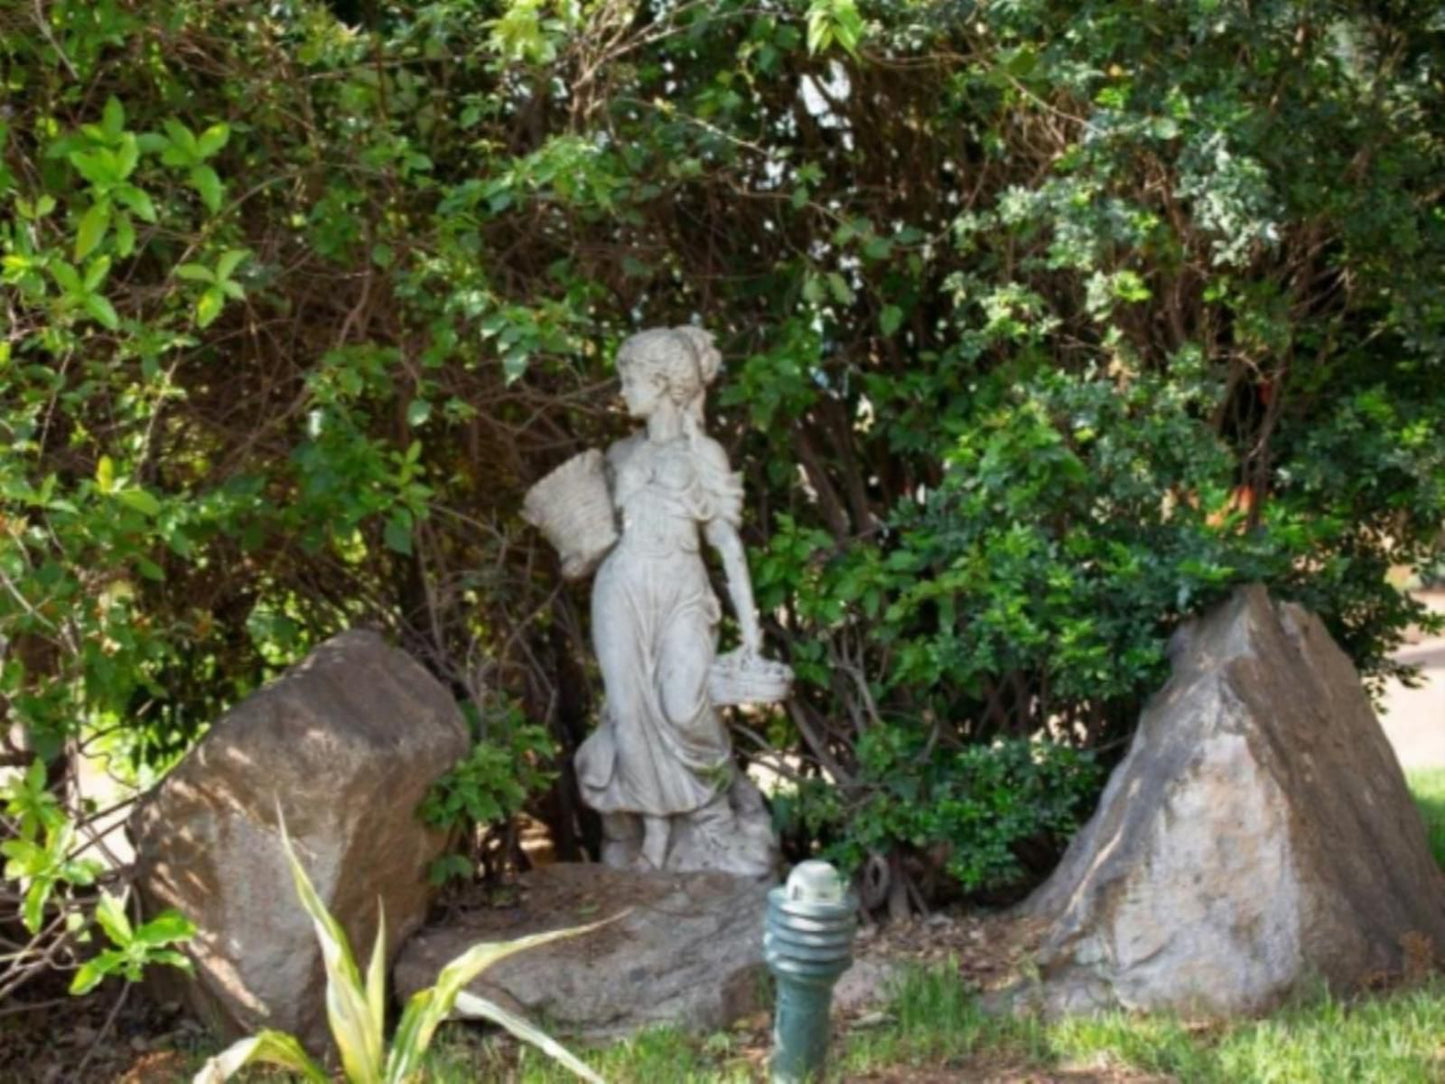 Amigos Guesthouse Brits North West Province South Africa Statue, Architecture, Art, Tree, Plant, Nature, Wood, Cemetery, Religion, Grave